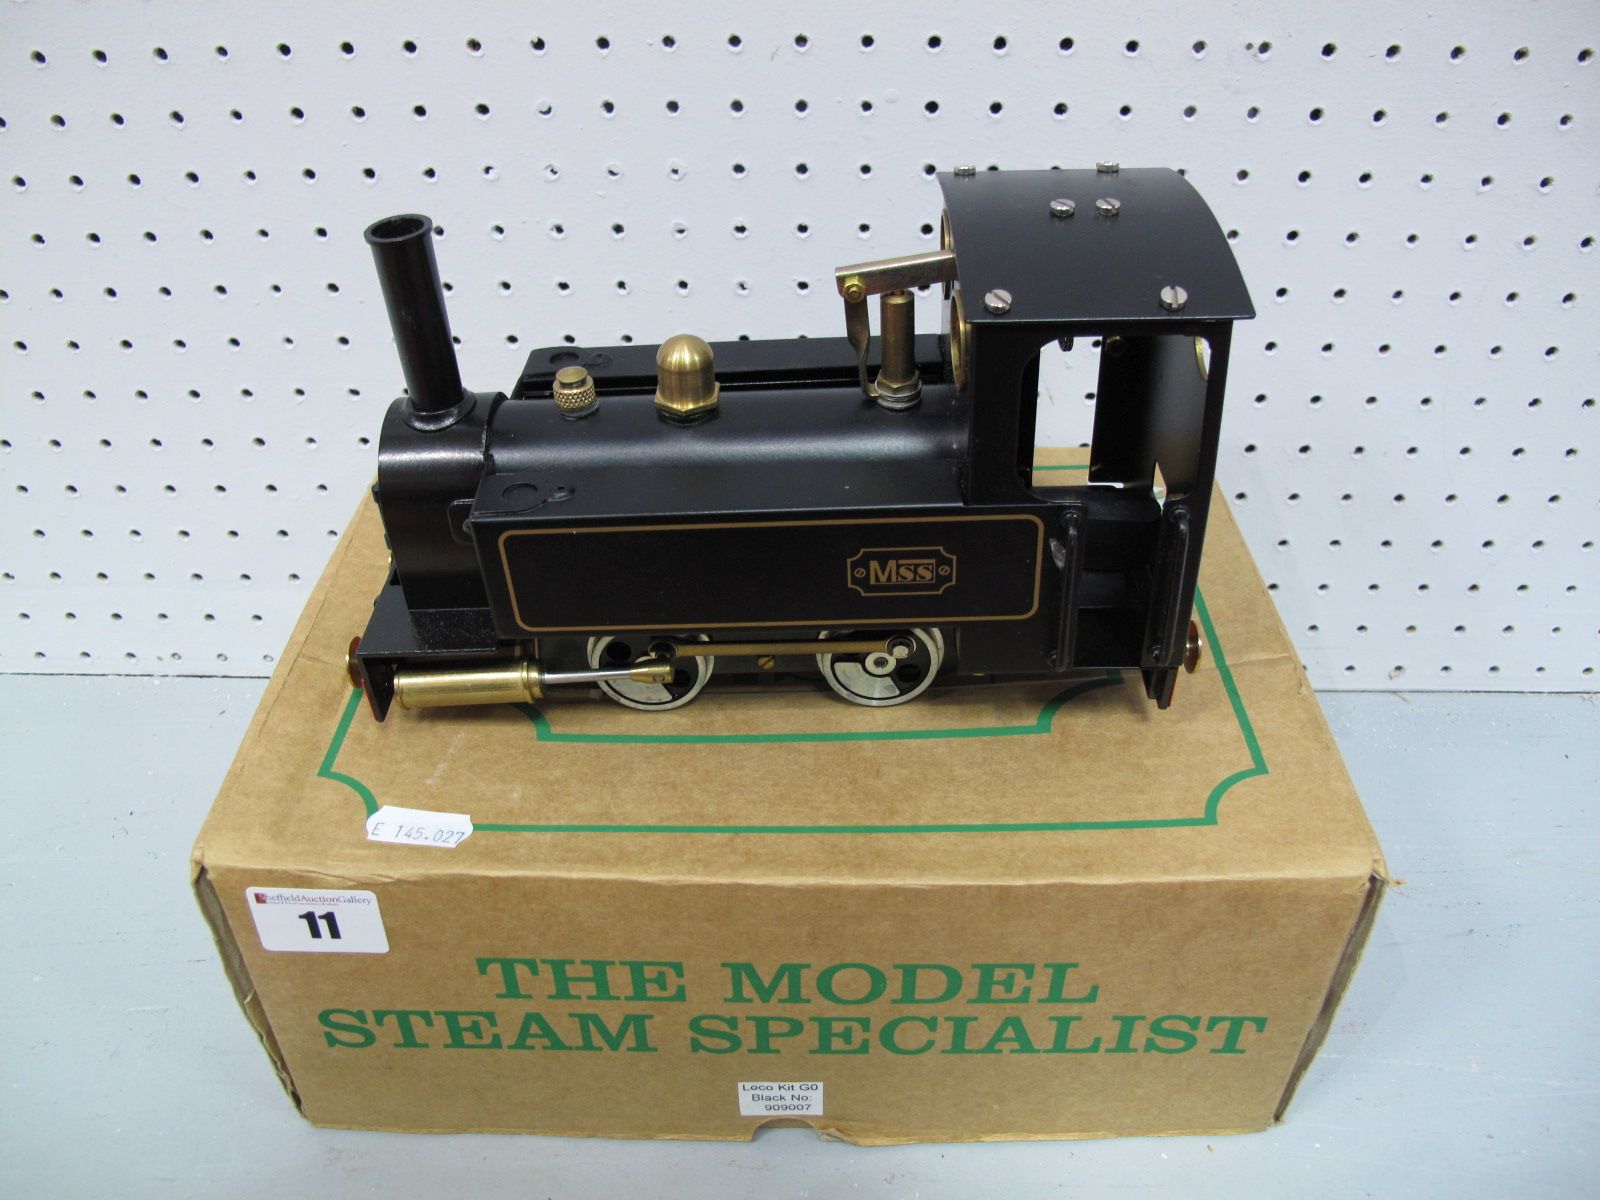 A Mamod/M55 0-4-0 Live Steam Locomotive, finished in black and gold, appears un-steamed. In